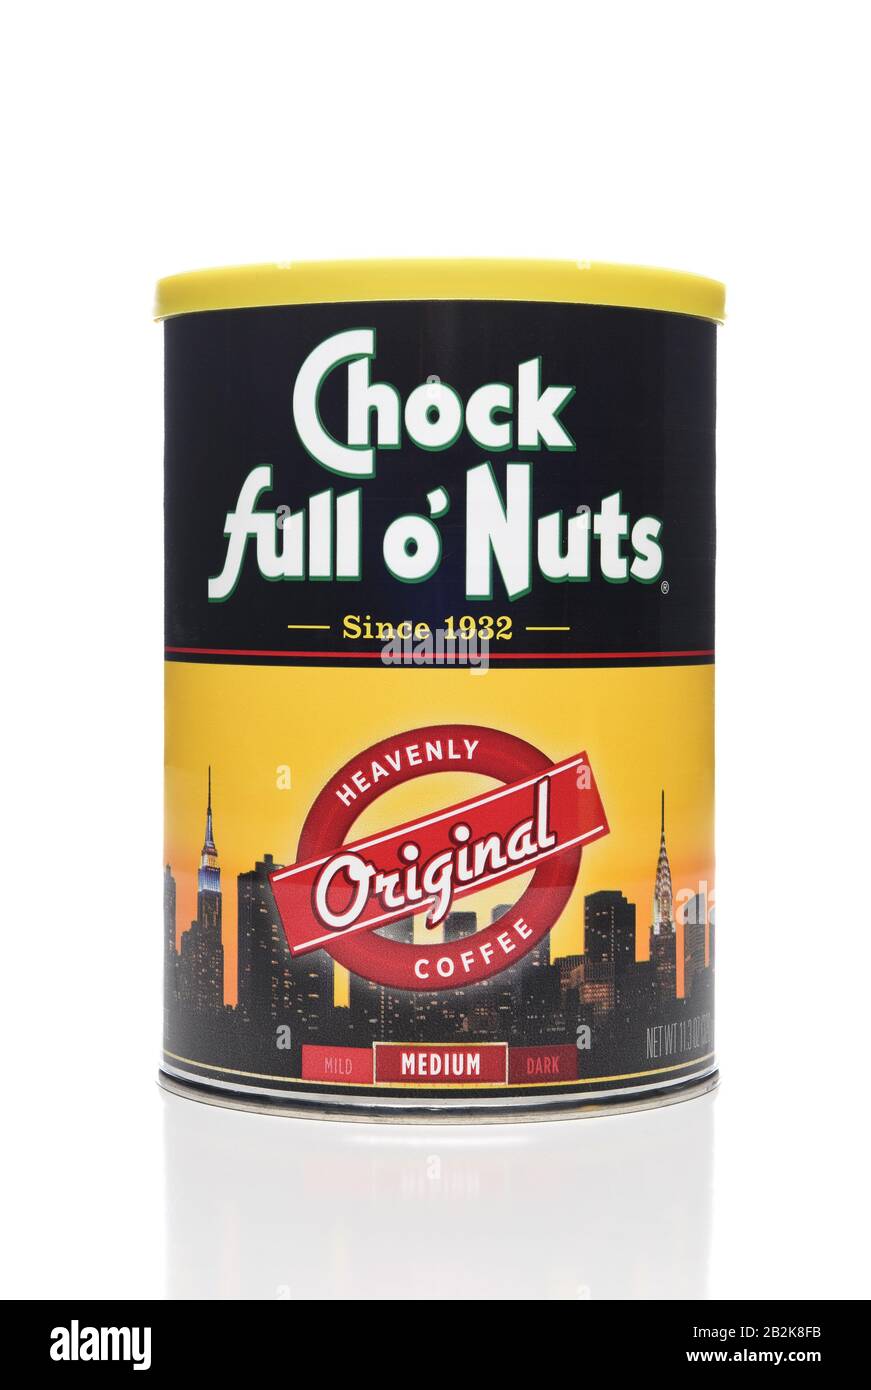 IRVINE, CALIFORNIA - OCT 27, 2018: A can of Chock Full o Nuts Coffee. The brand originated from a chain of New York City coffee shops. Stock Photo